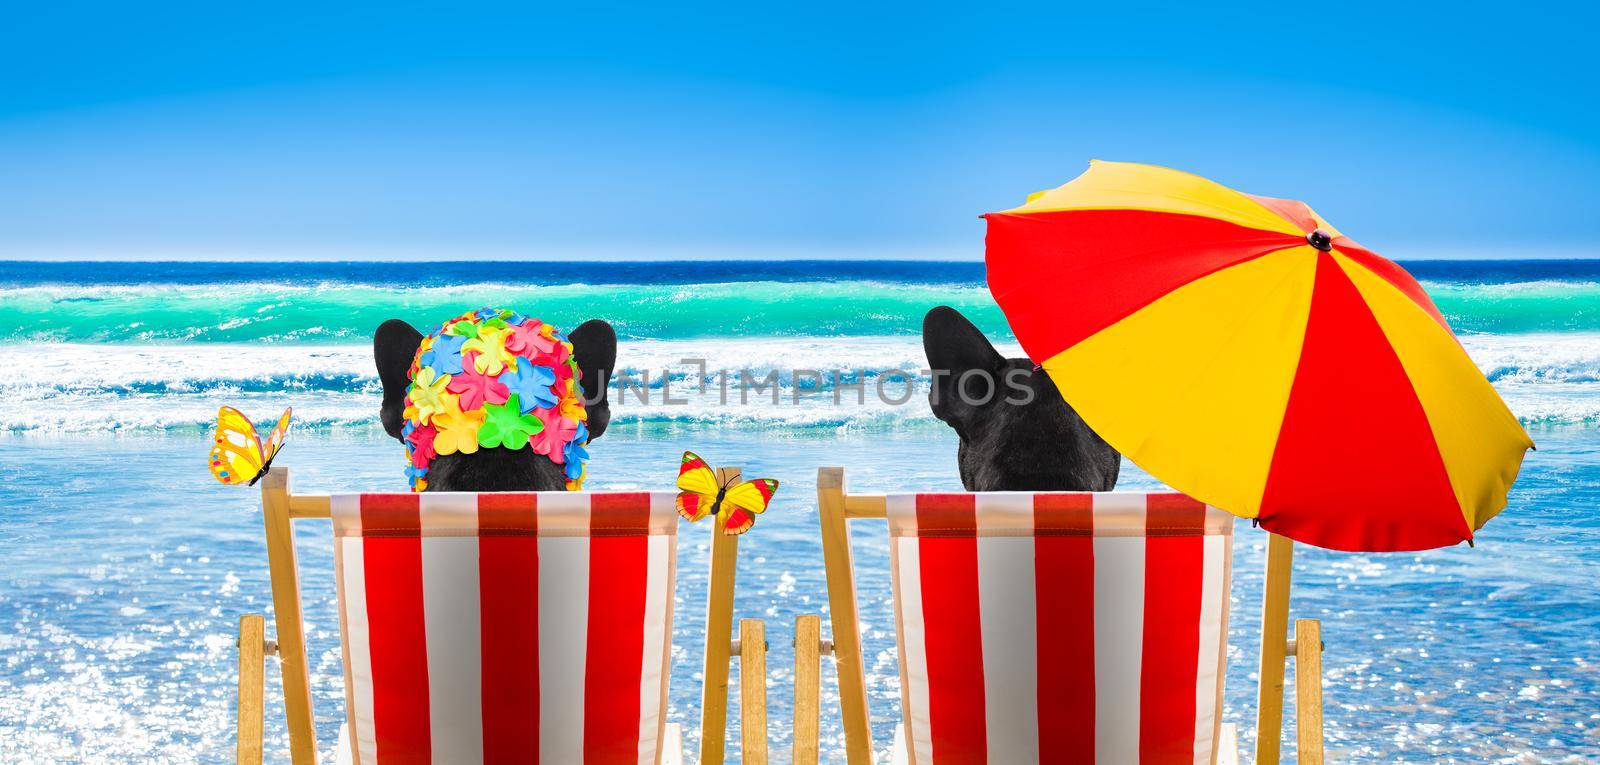 dog resting and relaxing on a hammock or beach chair under umbrella at the beach ocean shore, on summer vacation holidays